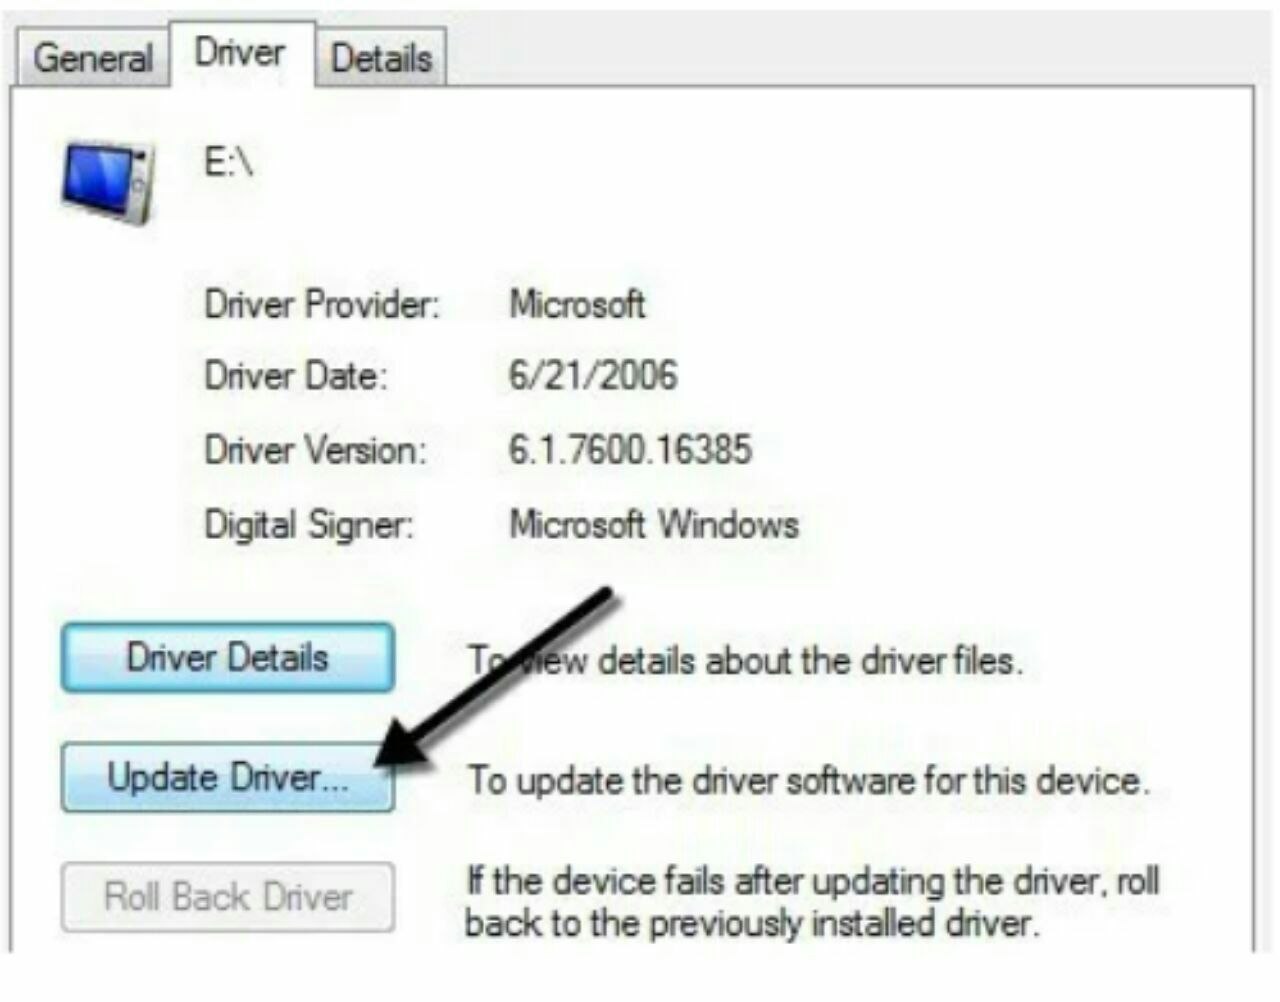 tap on Update driver